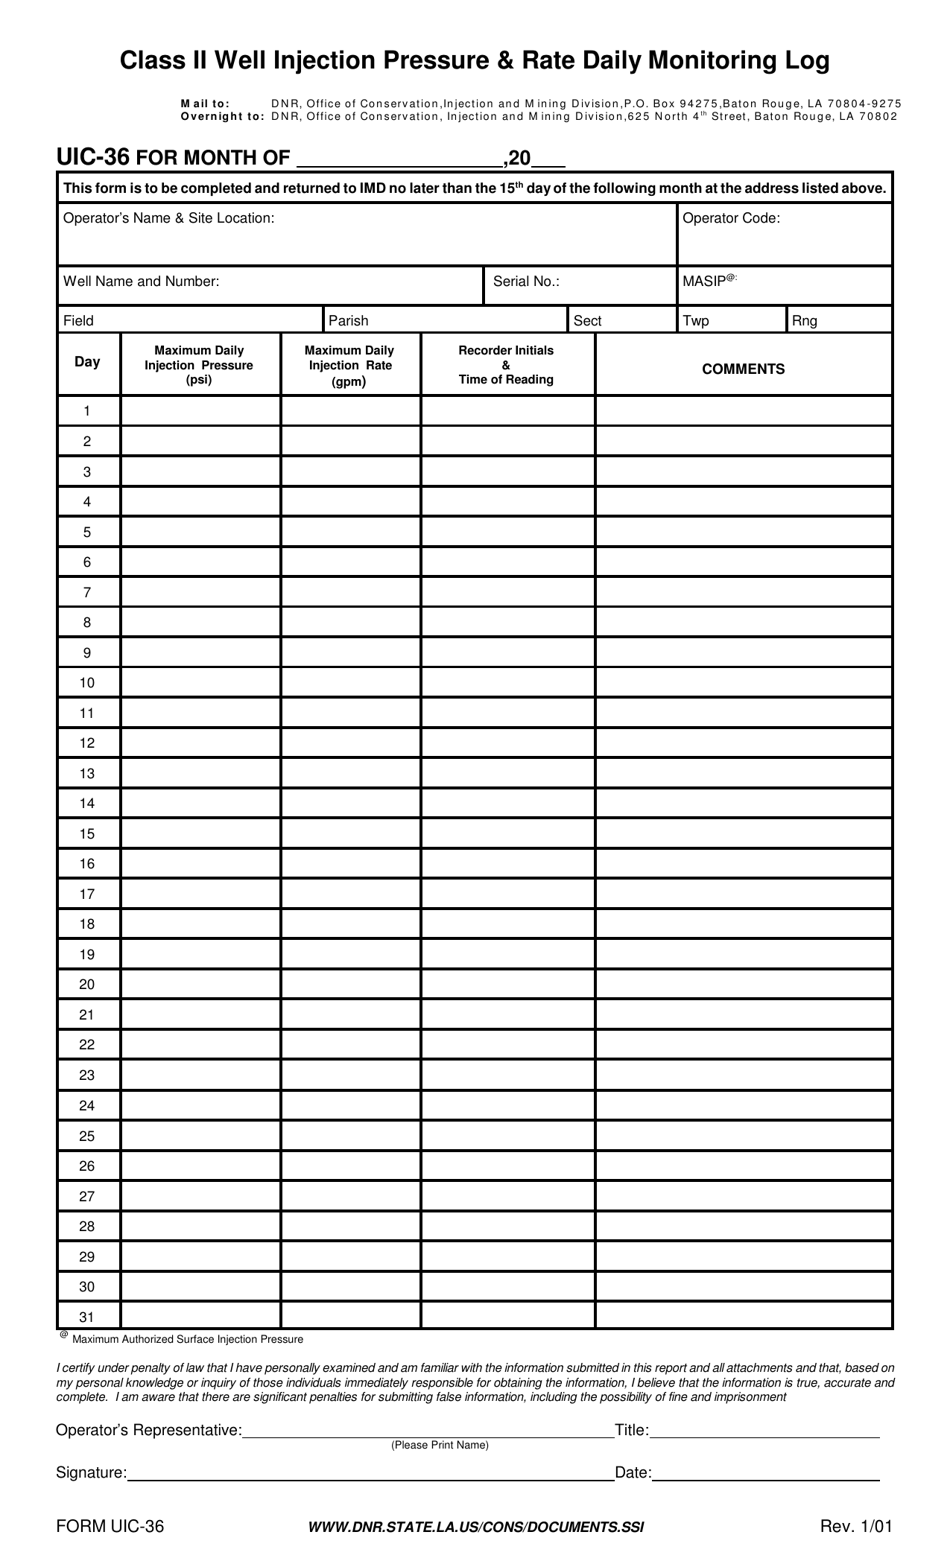 Form UIC-36 Class II Well Injection Pressure  Rate Daily Monitoring Log - Louisiana, Page 1